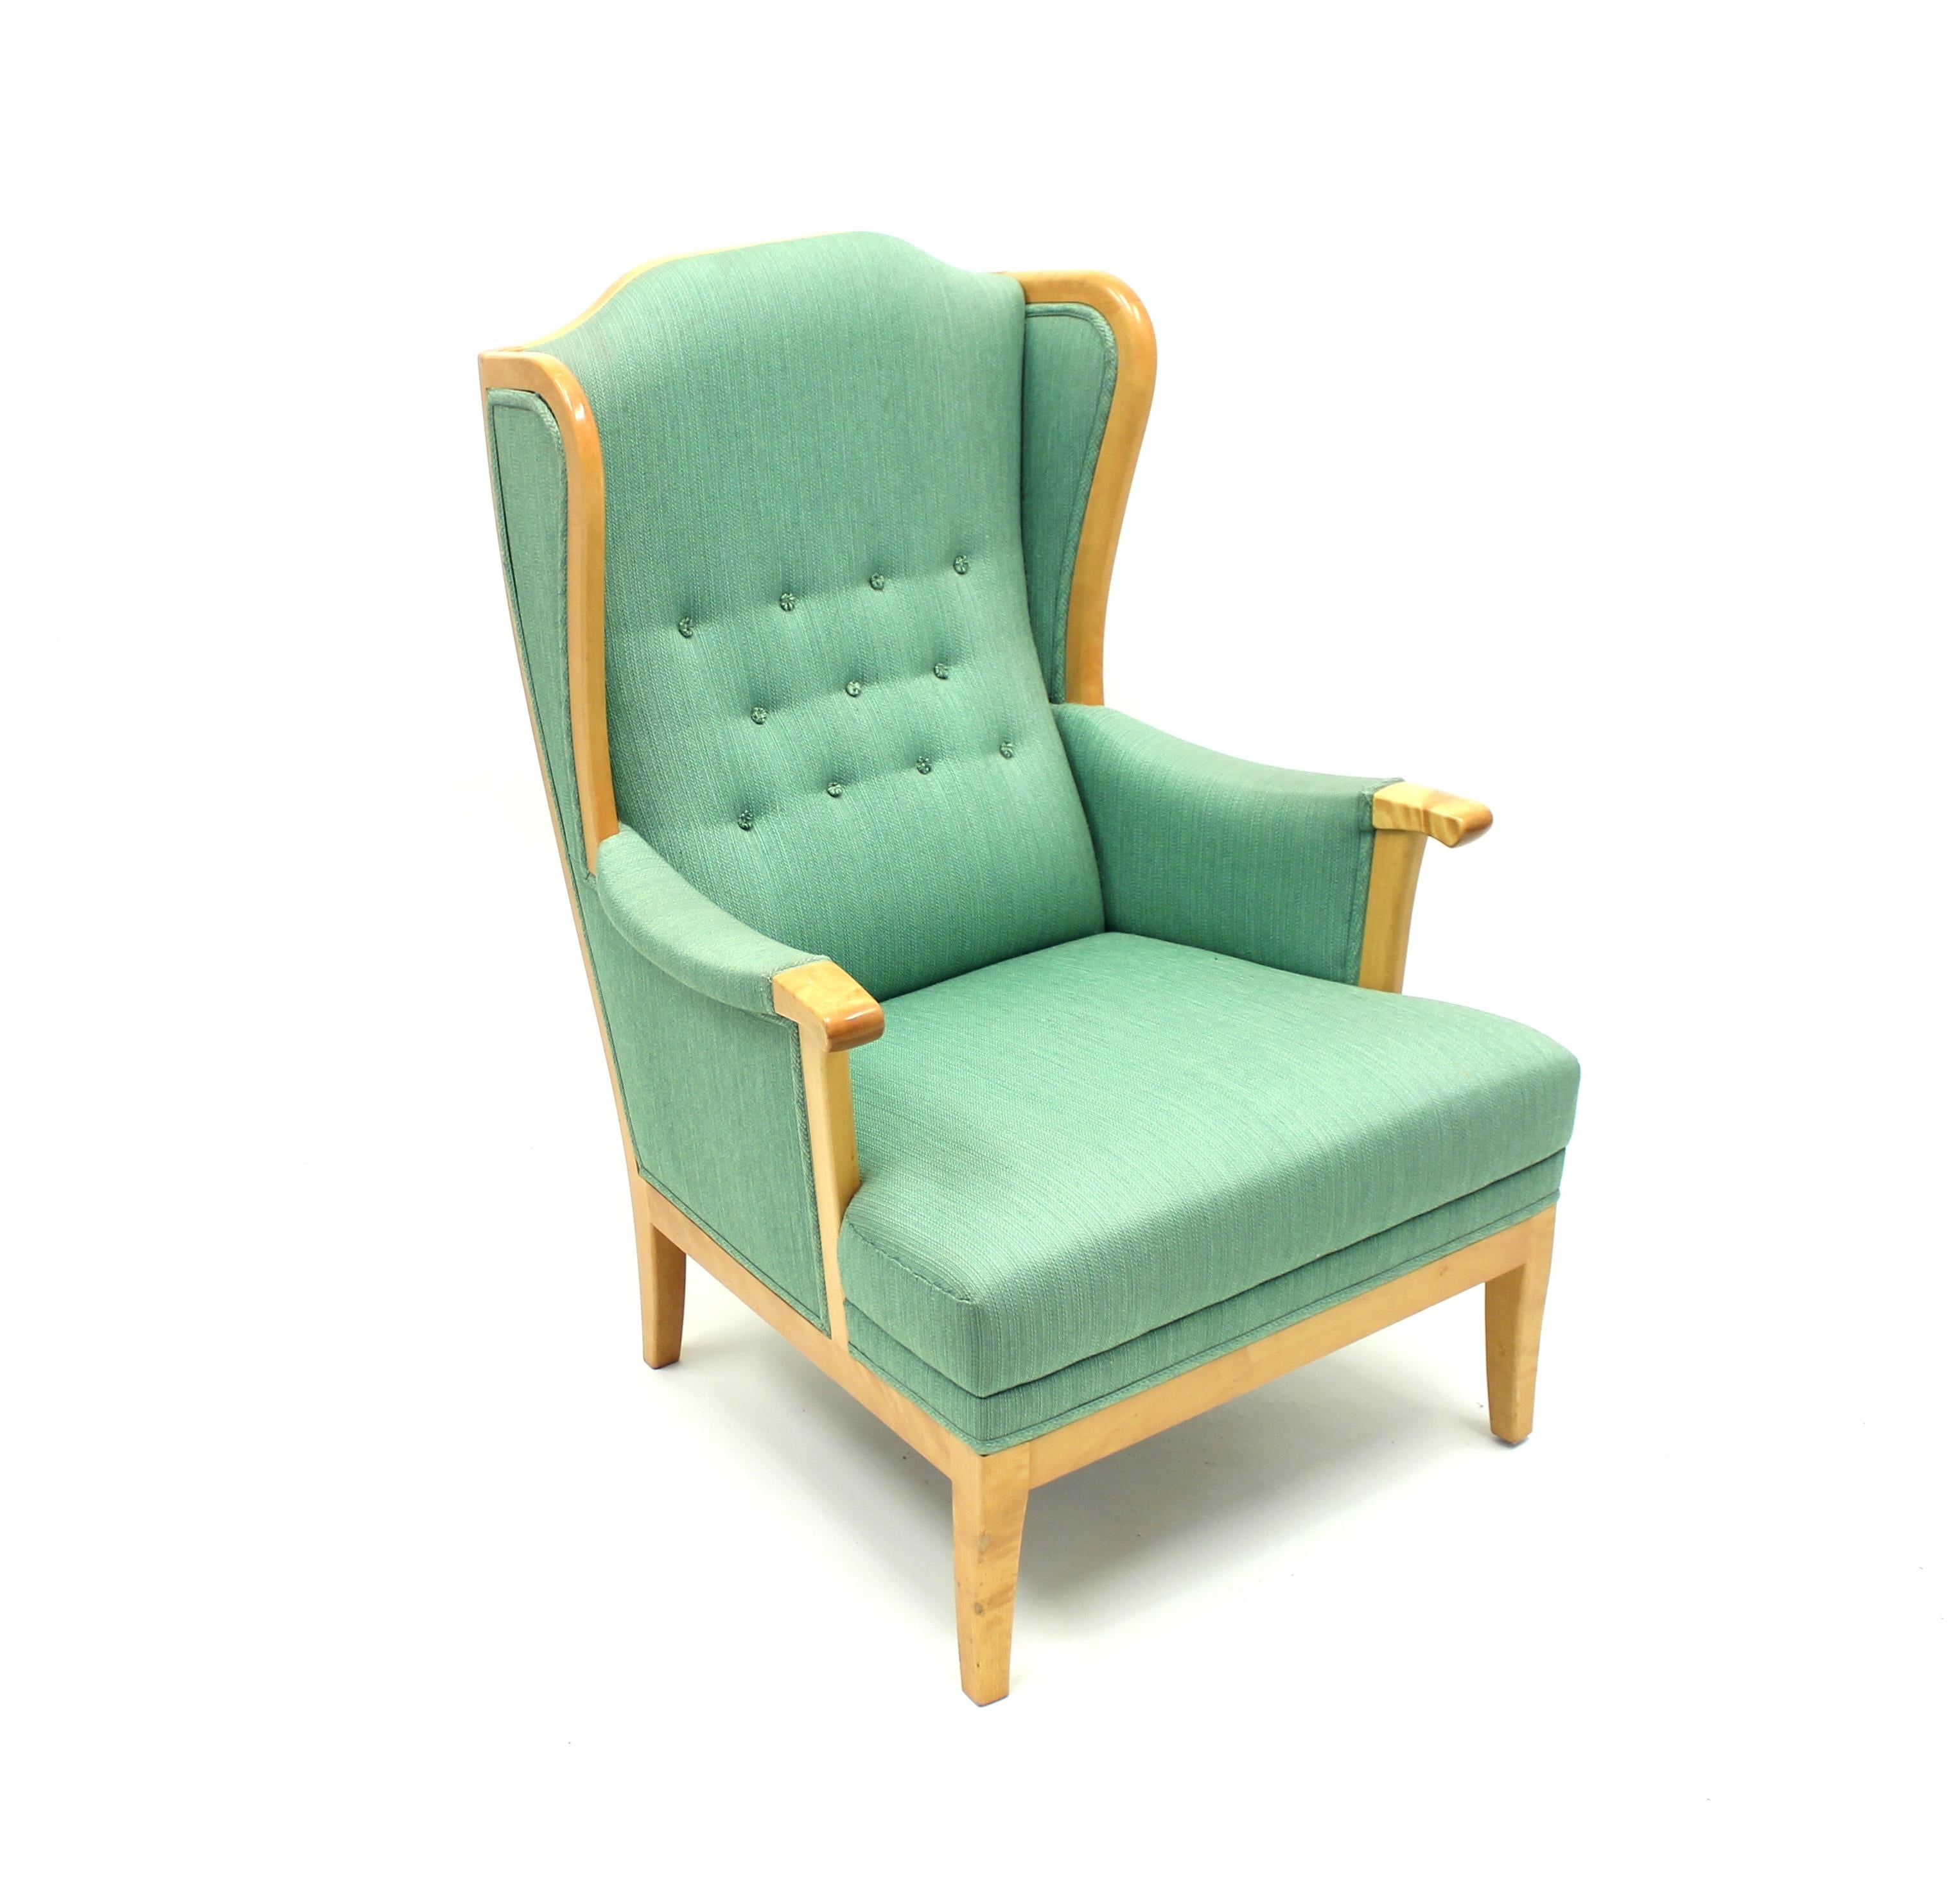 Lounge chair, model Husfadern (The house father), designed by Carl Malmsten for his long-time collaborator O.H. Sjögren. Original green Carl Malmsten fabric, sits on a lacquered birch frame. Ware consistent with age and use.